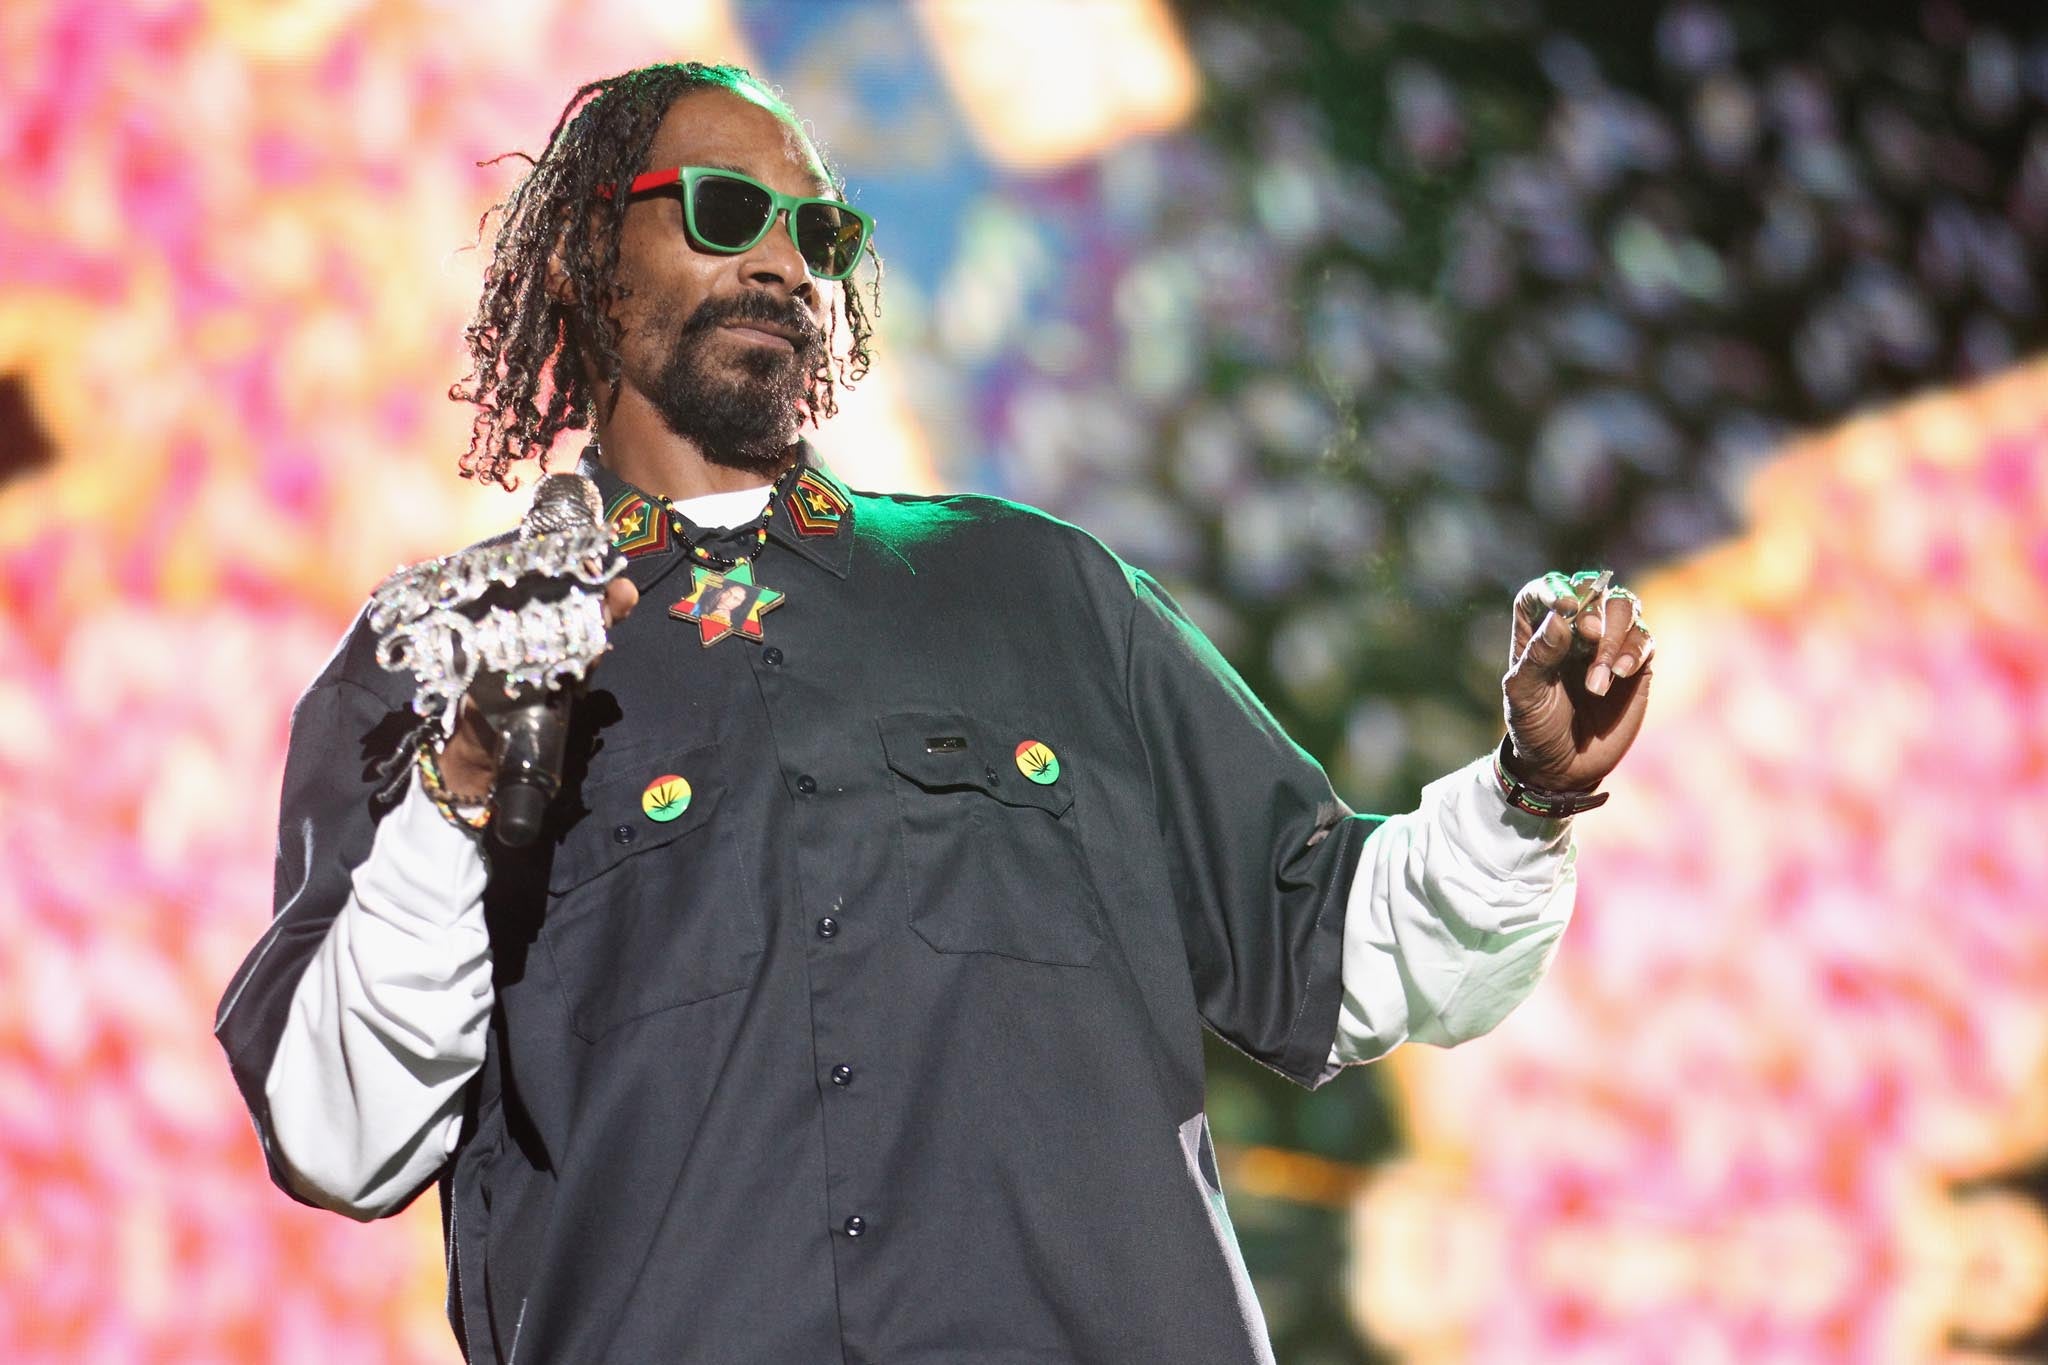 Snoop Dogg performs on stage at Coachella, 2012